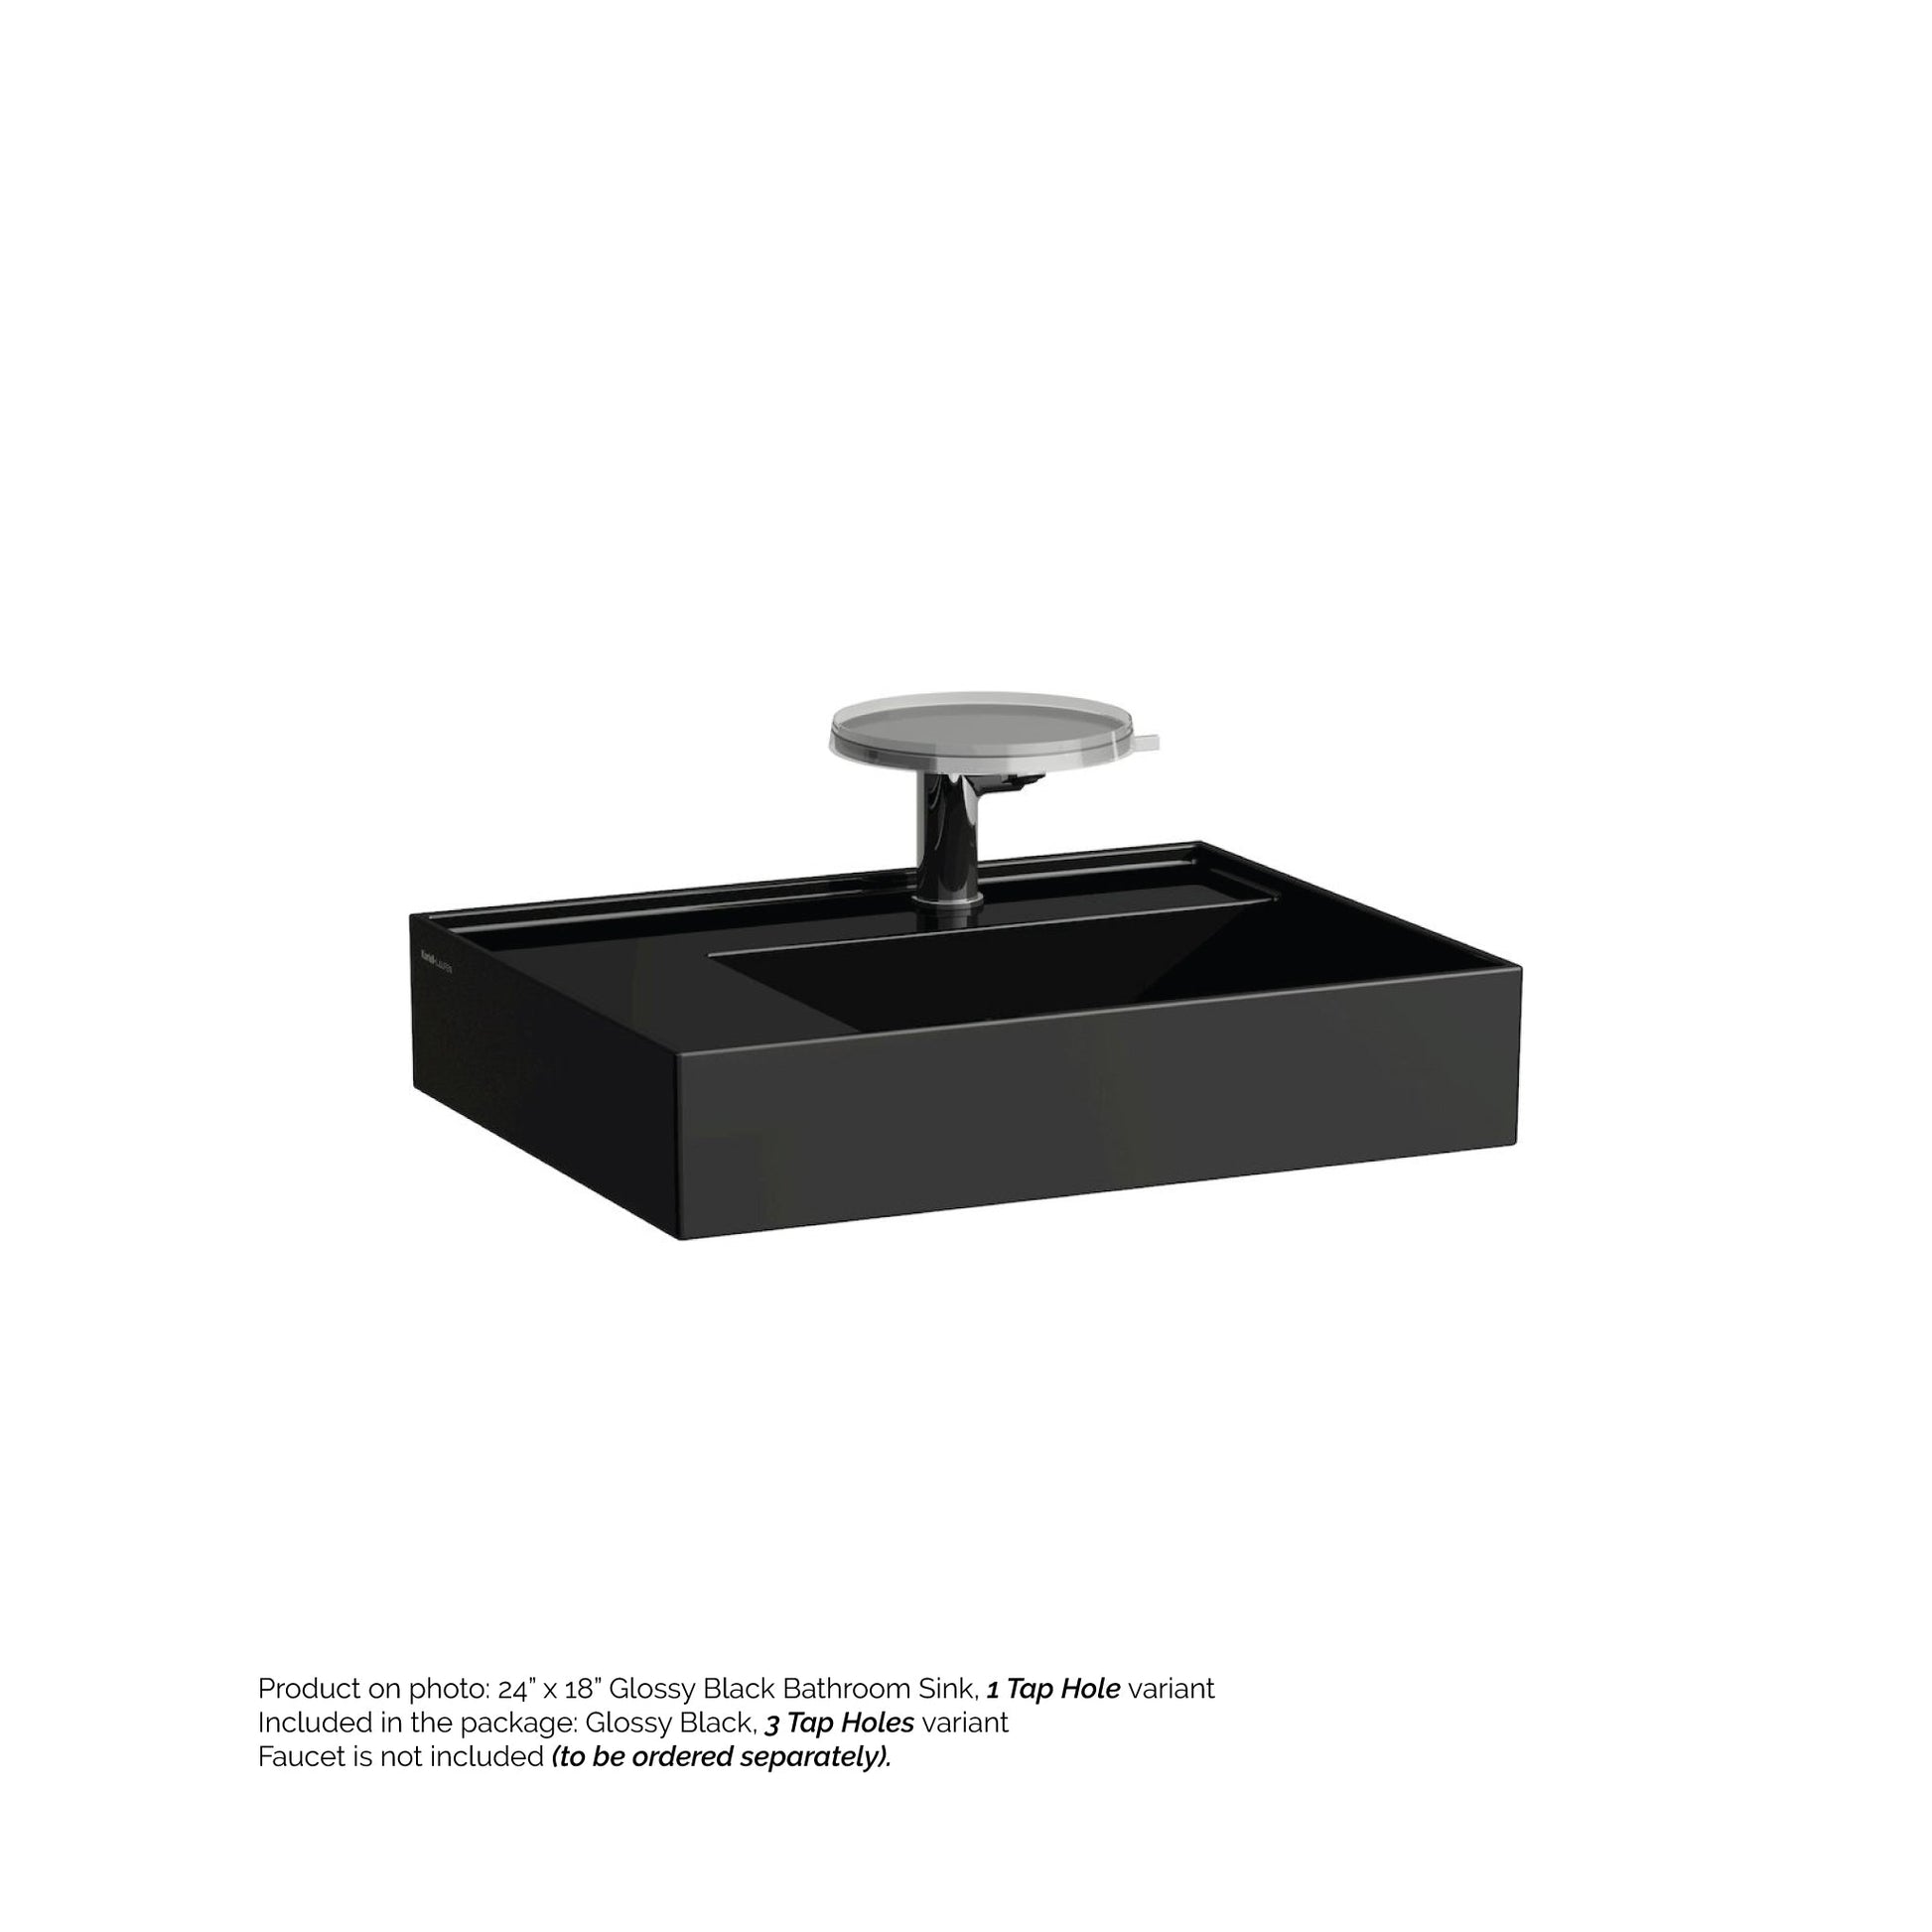 Laufen Kartell 24" x 18" Glossy Black Wall-Mounted Shelf-Left Bathroom Sink With 3 Faucet Holes